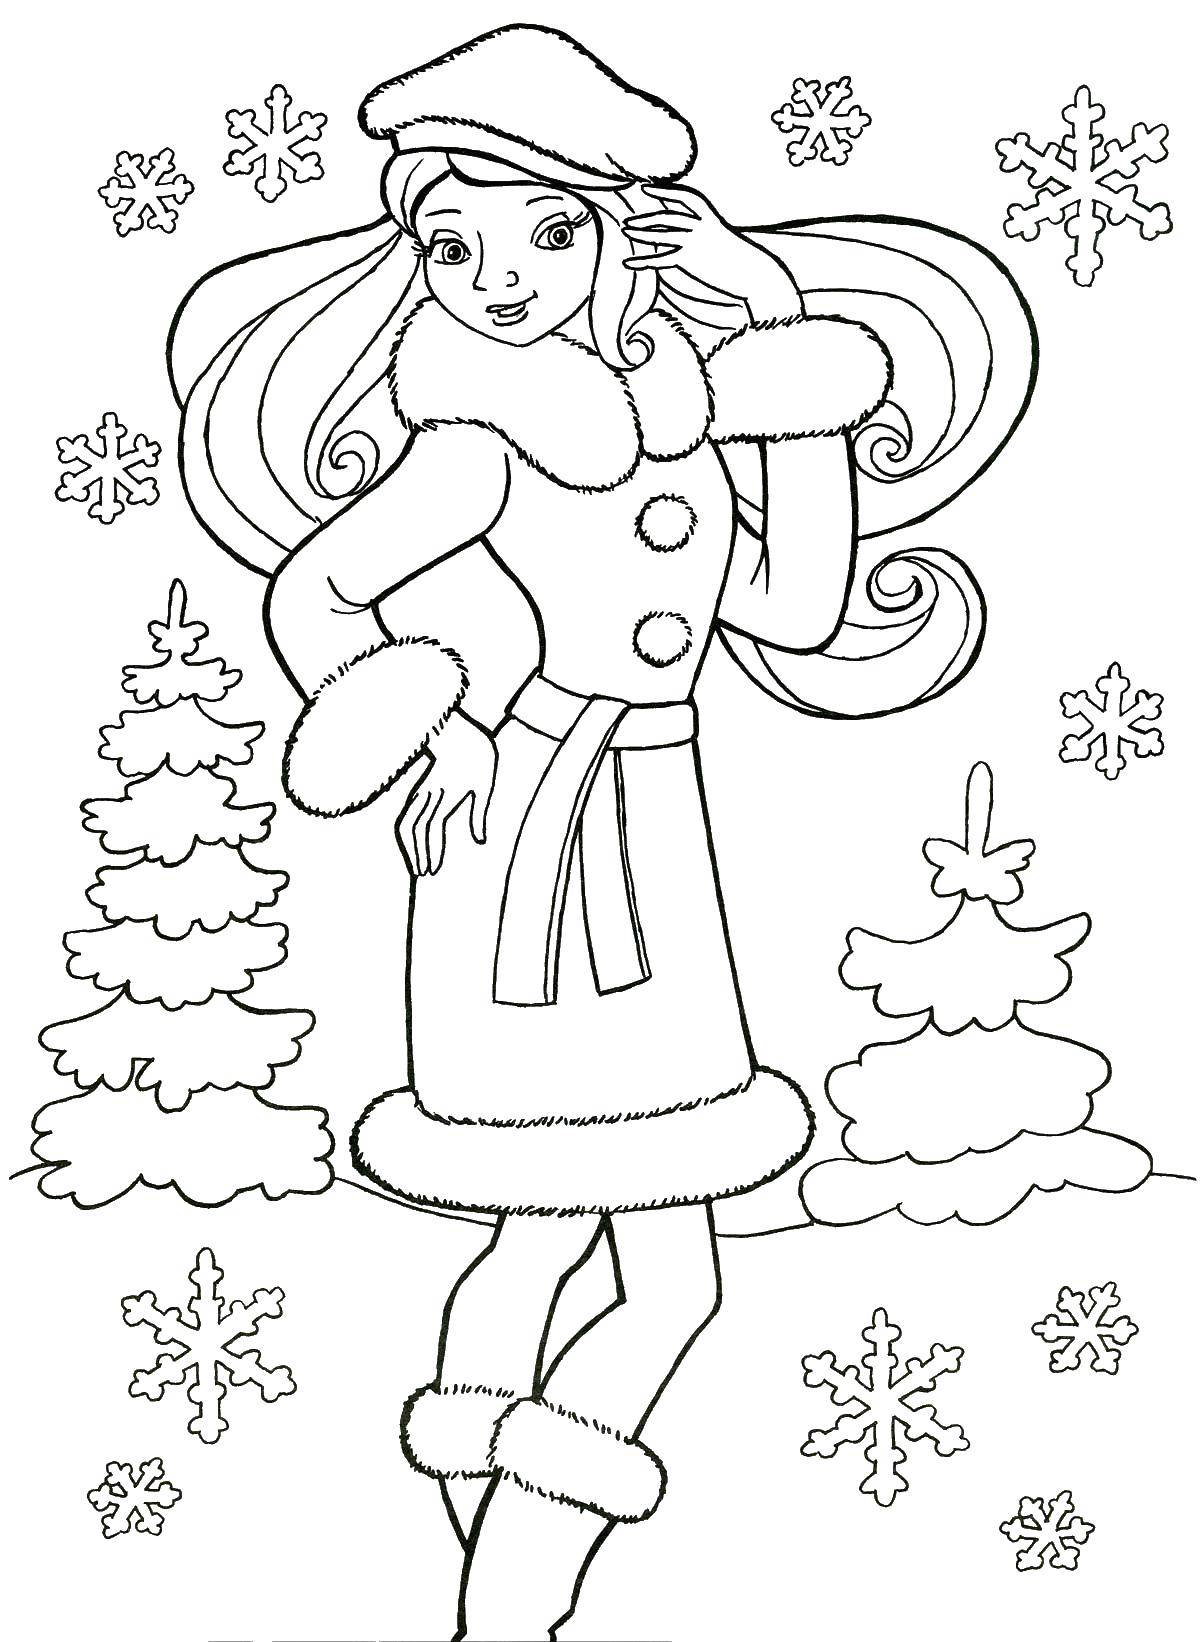 Coloring Barbie coat. Category coloring pages for girls. Tags:  Barbie .